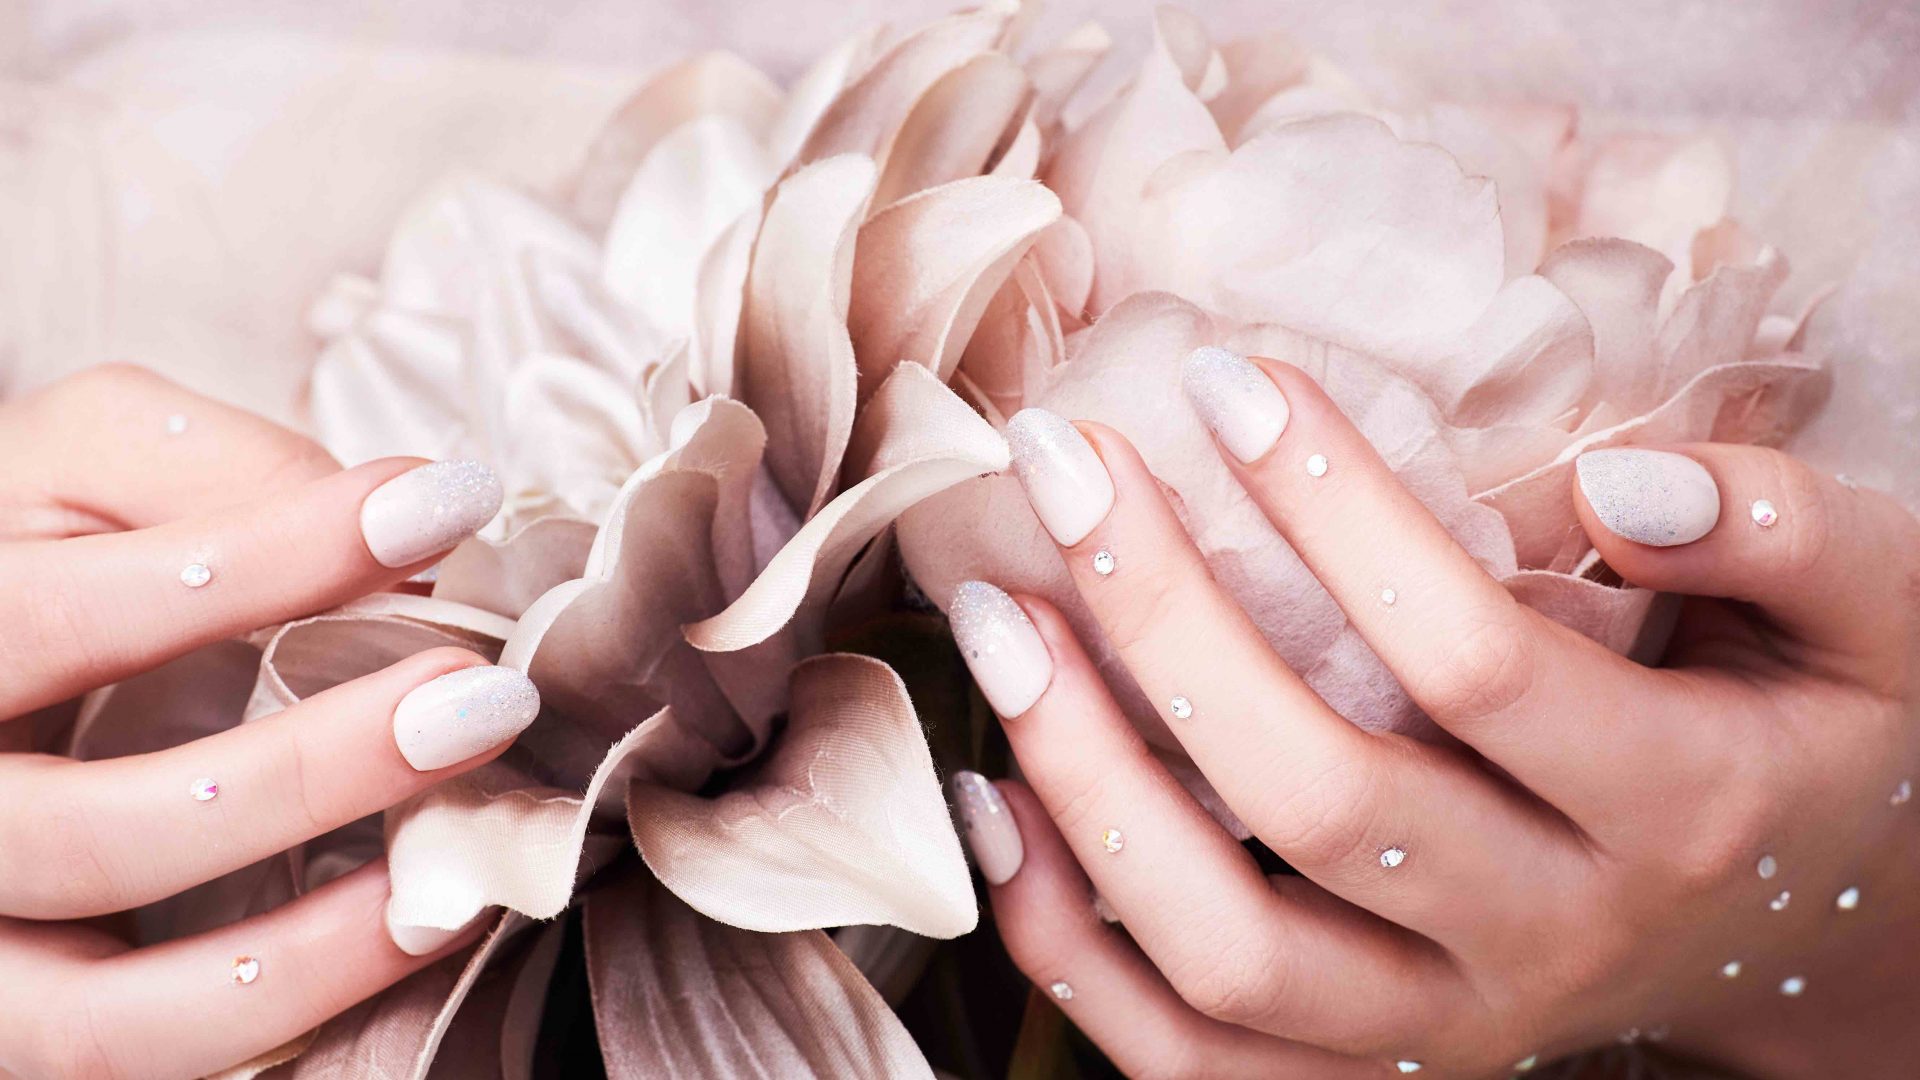 bridal_nails-in-london-nails-by-mets-1920x1080.jpg